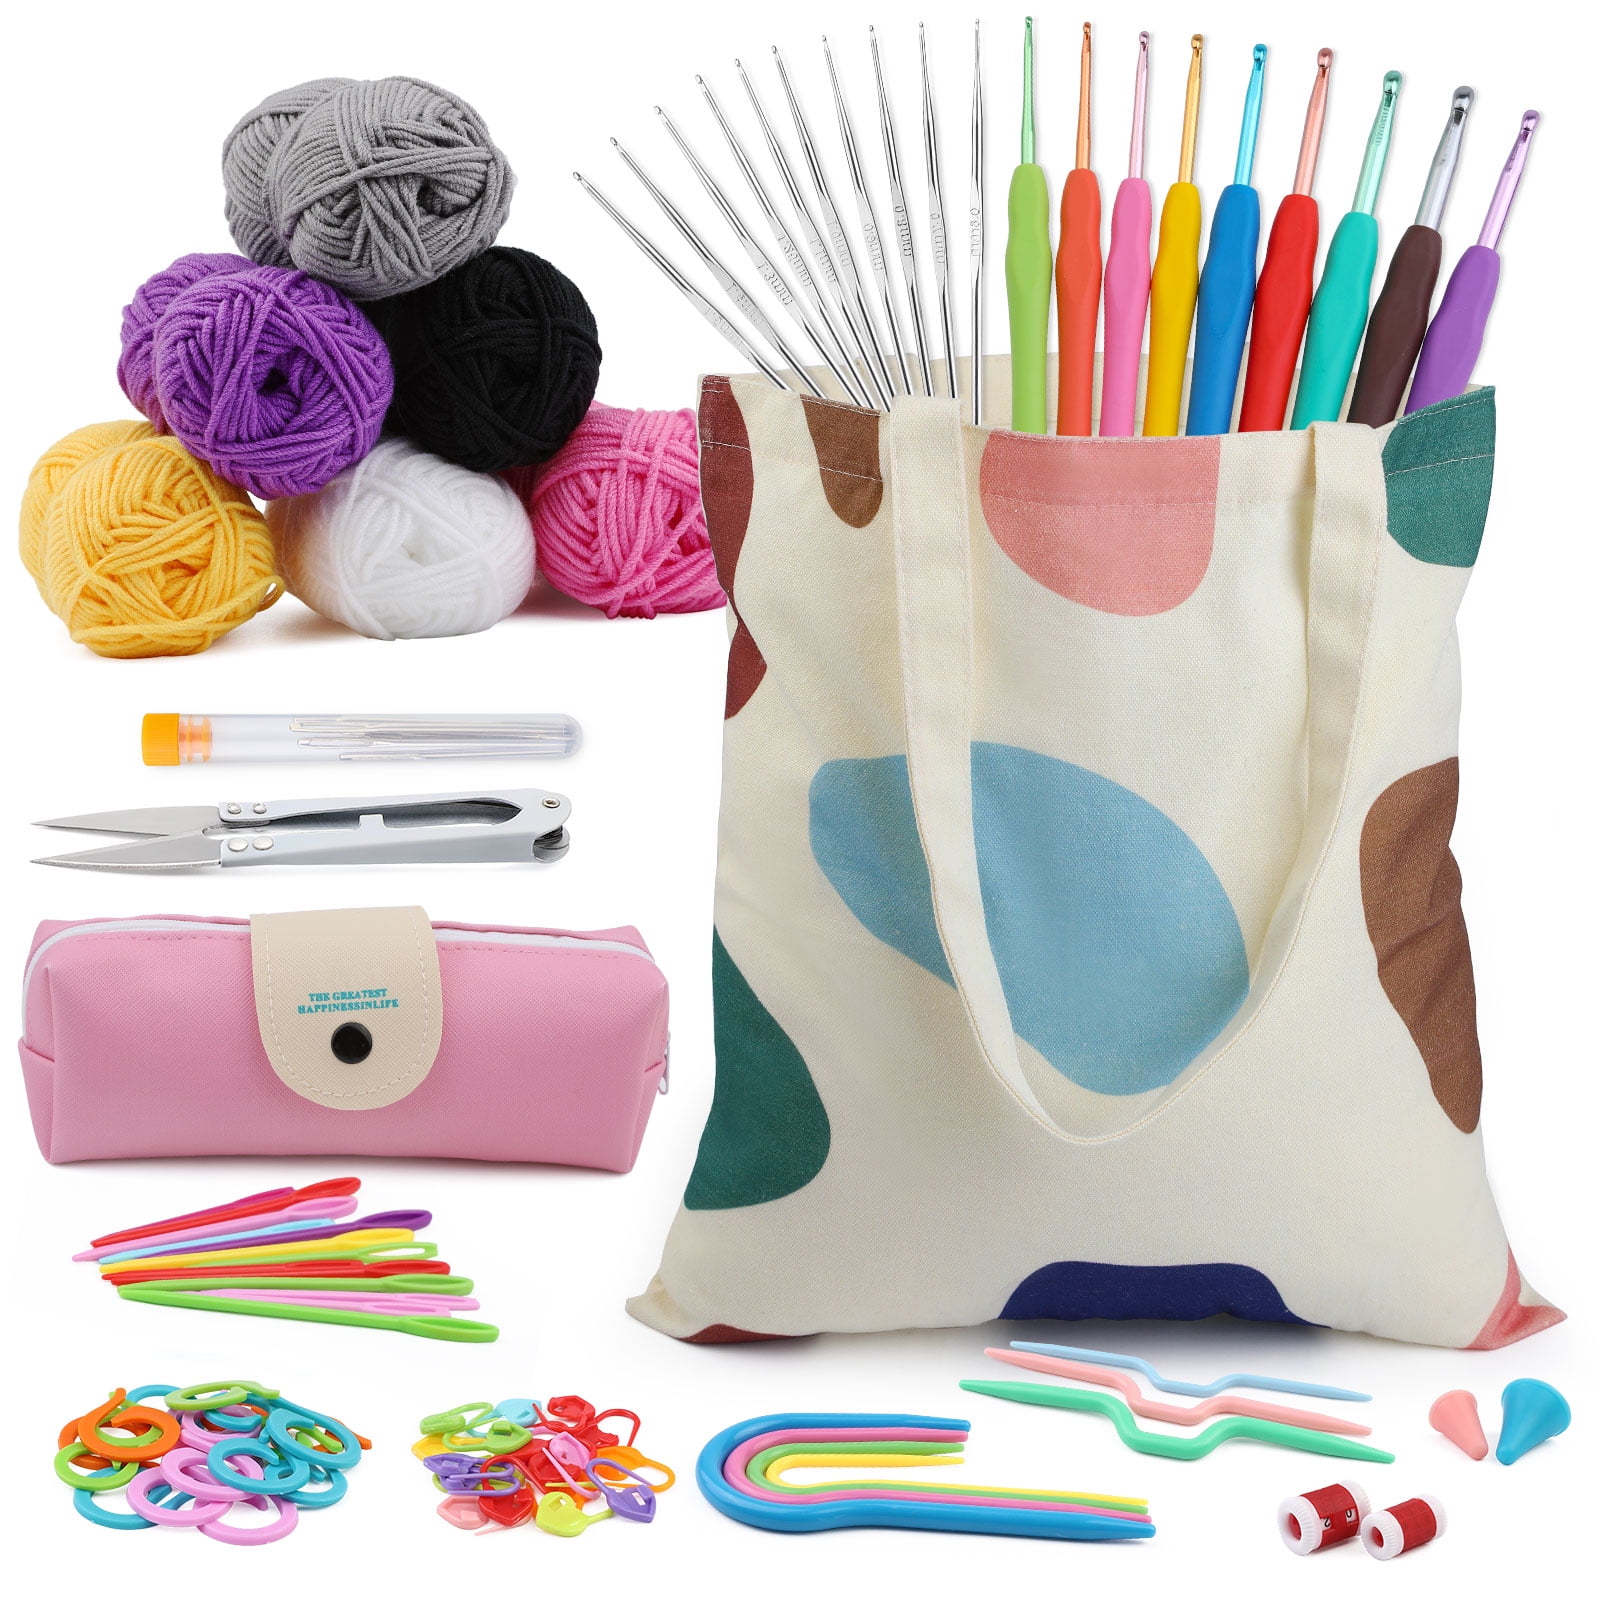 KRABALL Crochet Hook Yarn Ball Kit With Canvas Tote Bag and Knitting &  Crochet Knit Accessories